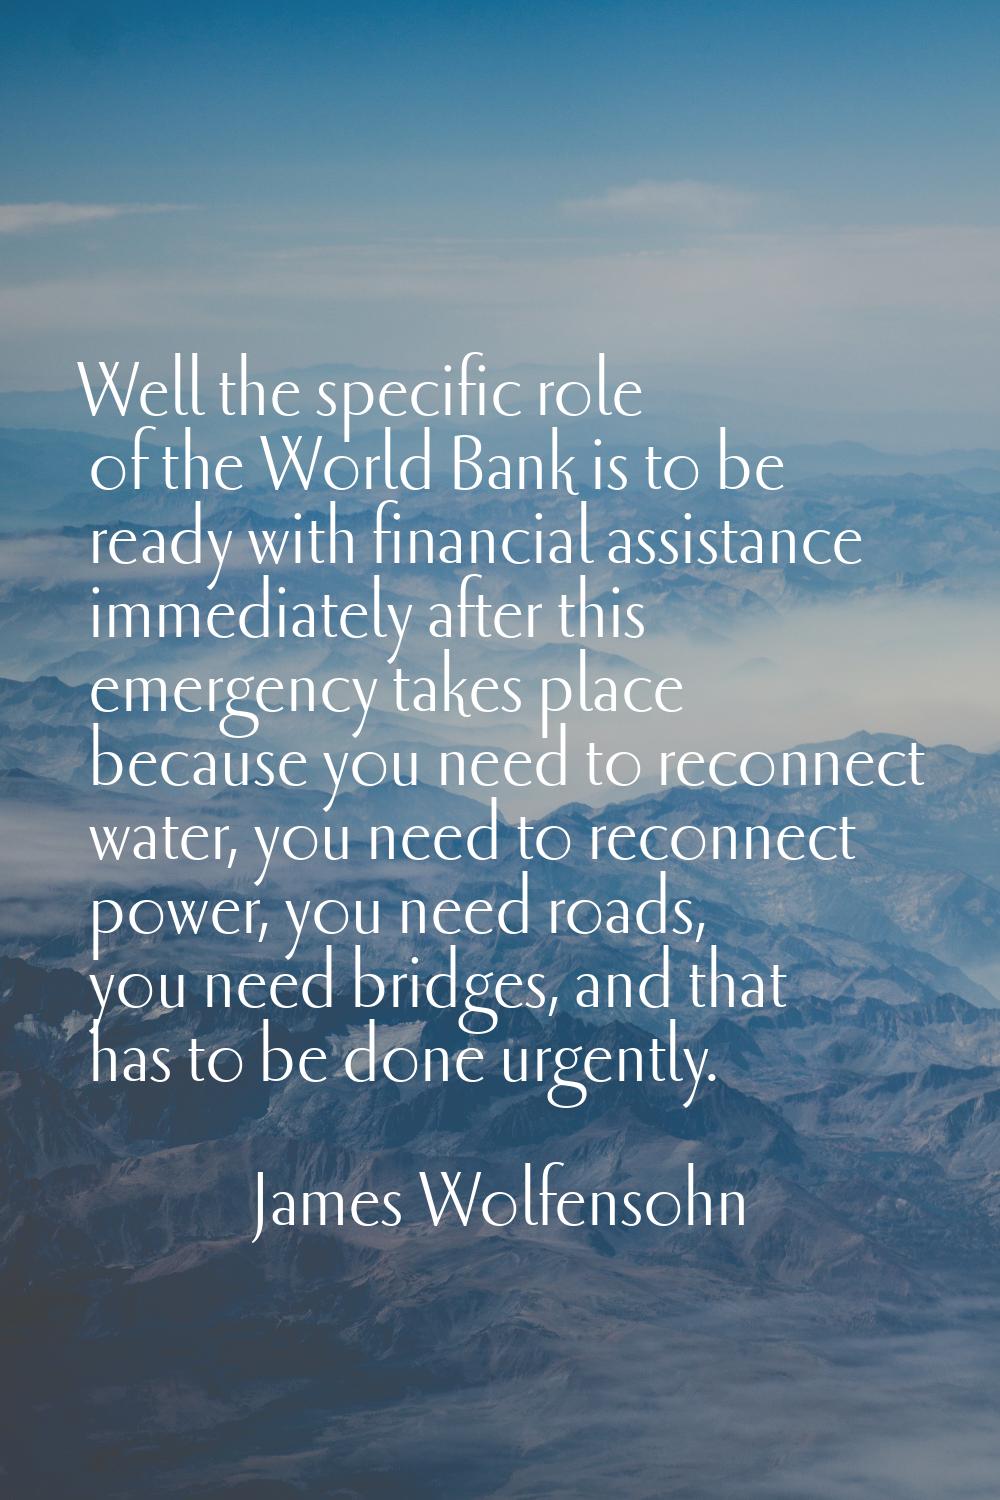 Well the specific role of the World Bank is to be ready with financial assistance immediately after